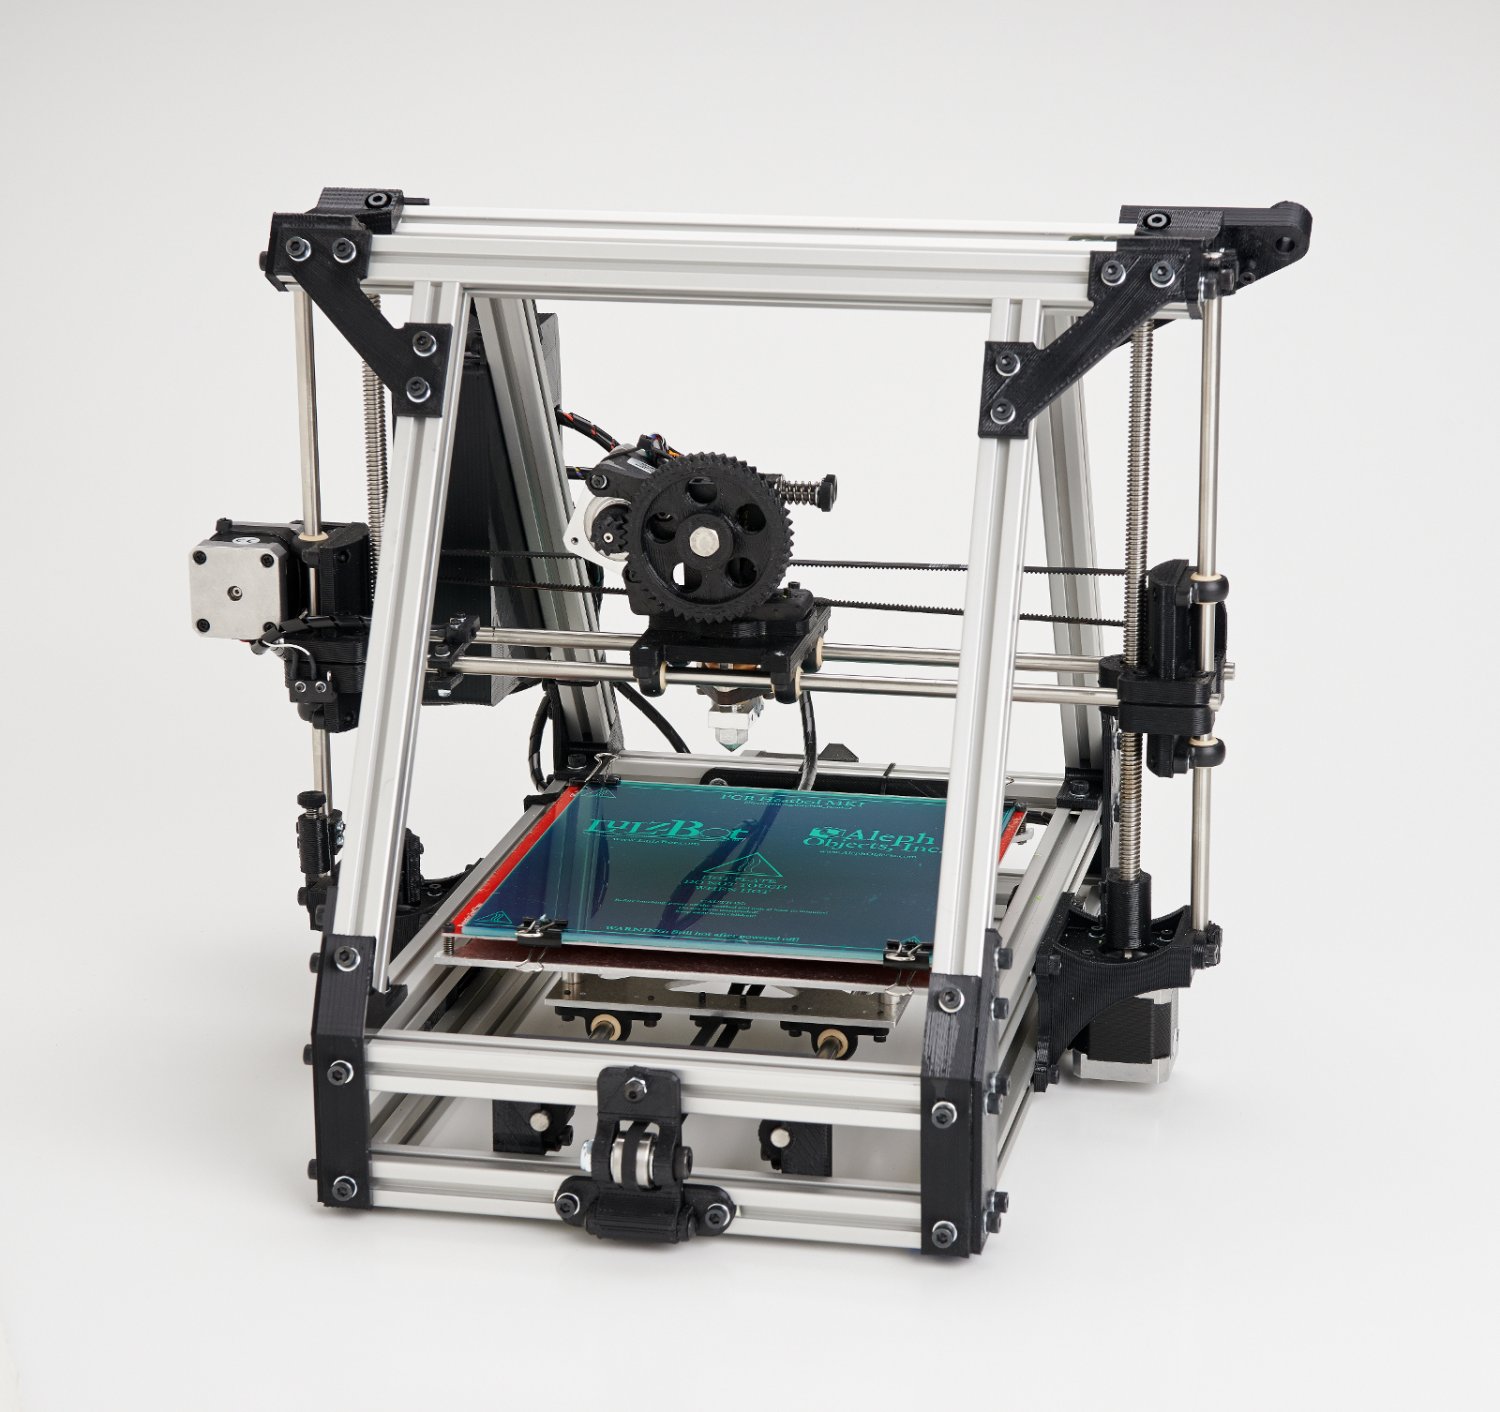 http://www.lulzbot.com/sites/default/files/styles/uc_product_full/public/p/newimages/2012/12/AO-101-1600.jpg